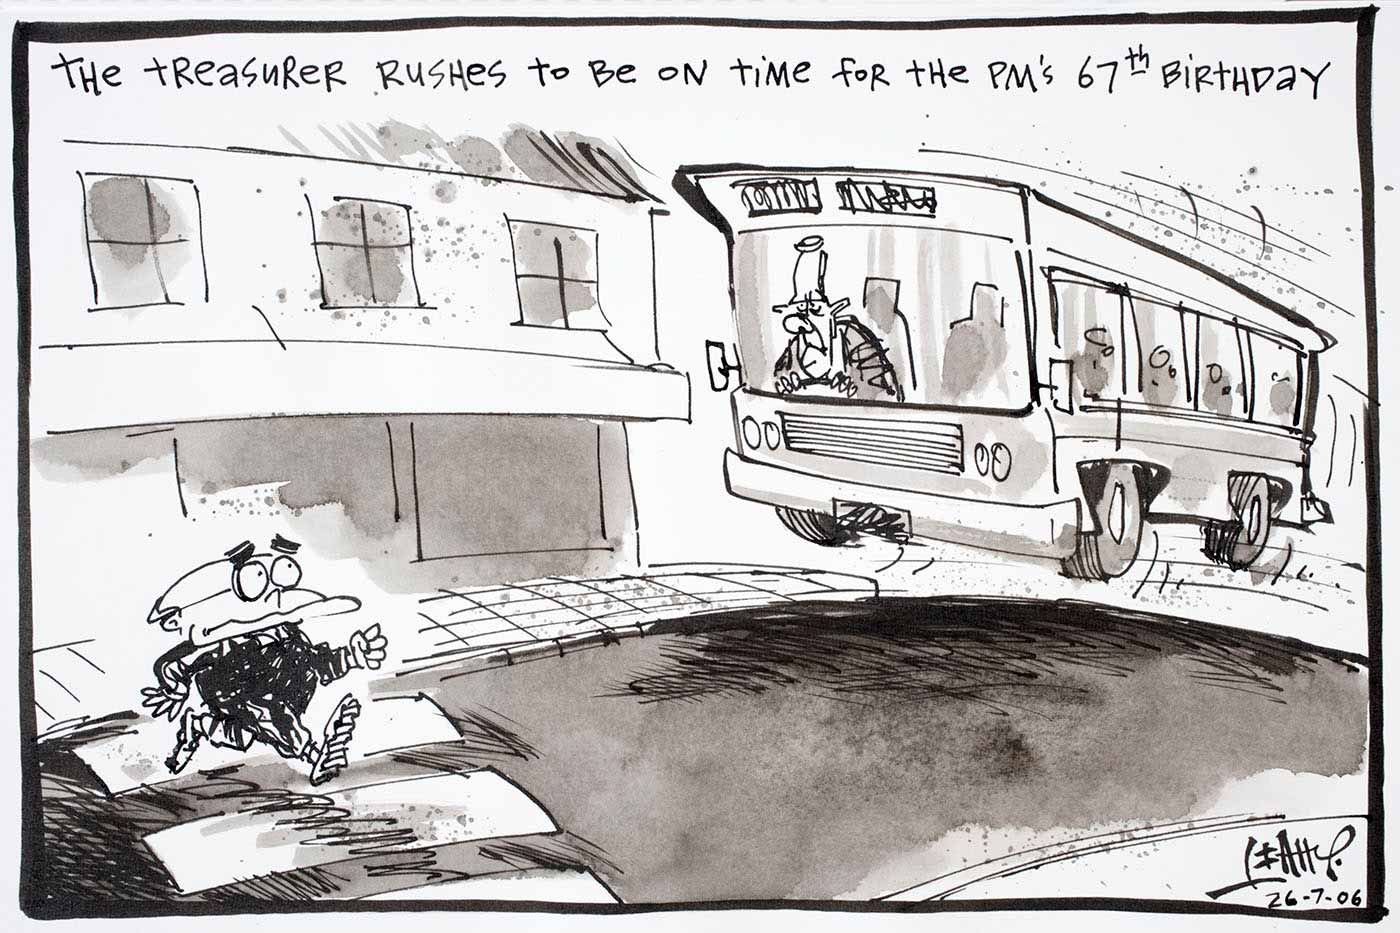 Political cartoon of Peter Costello driving a bus very fast trying to be on time for the Prime Minister's 67th birthday. Ahead of him is John Howard walking across a pedestrian crossing. - click to view larger image